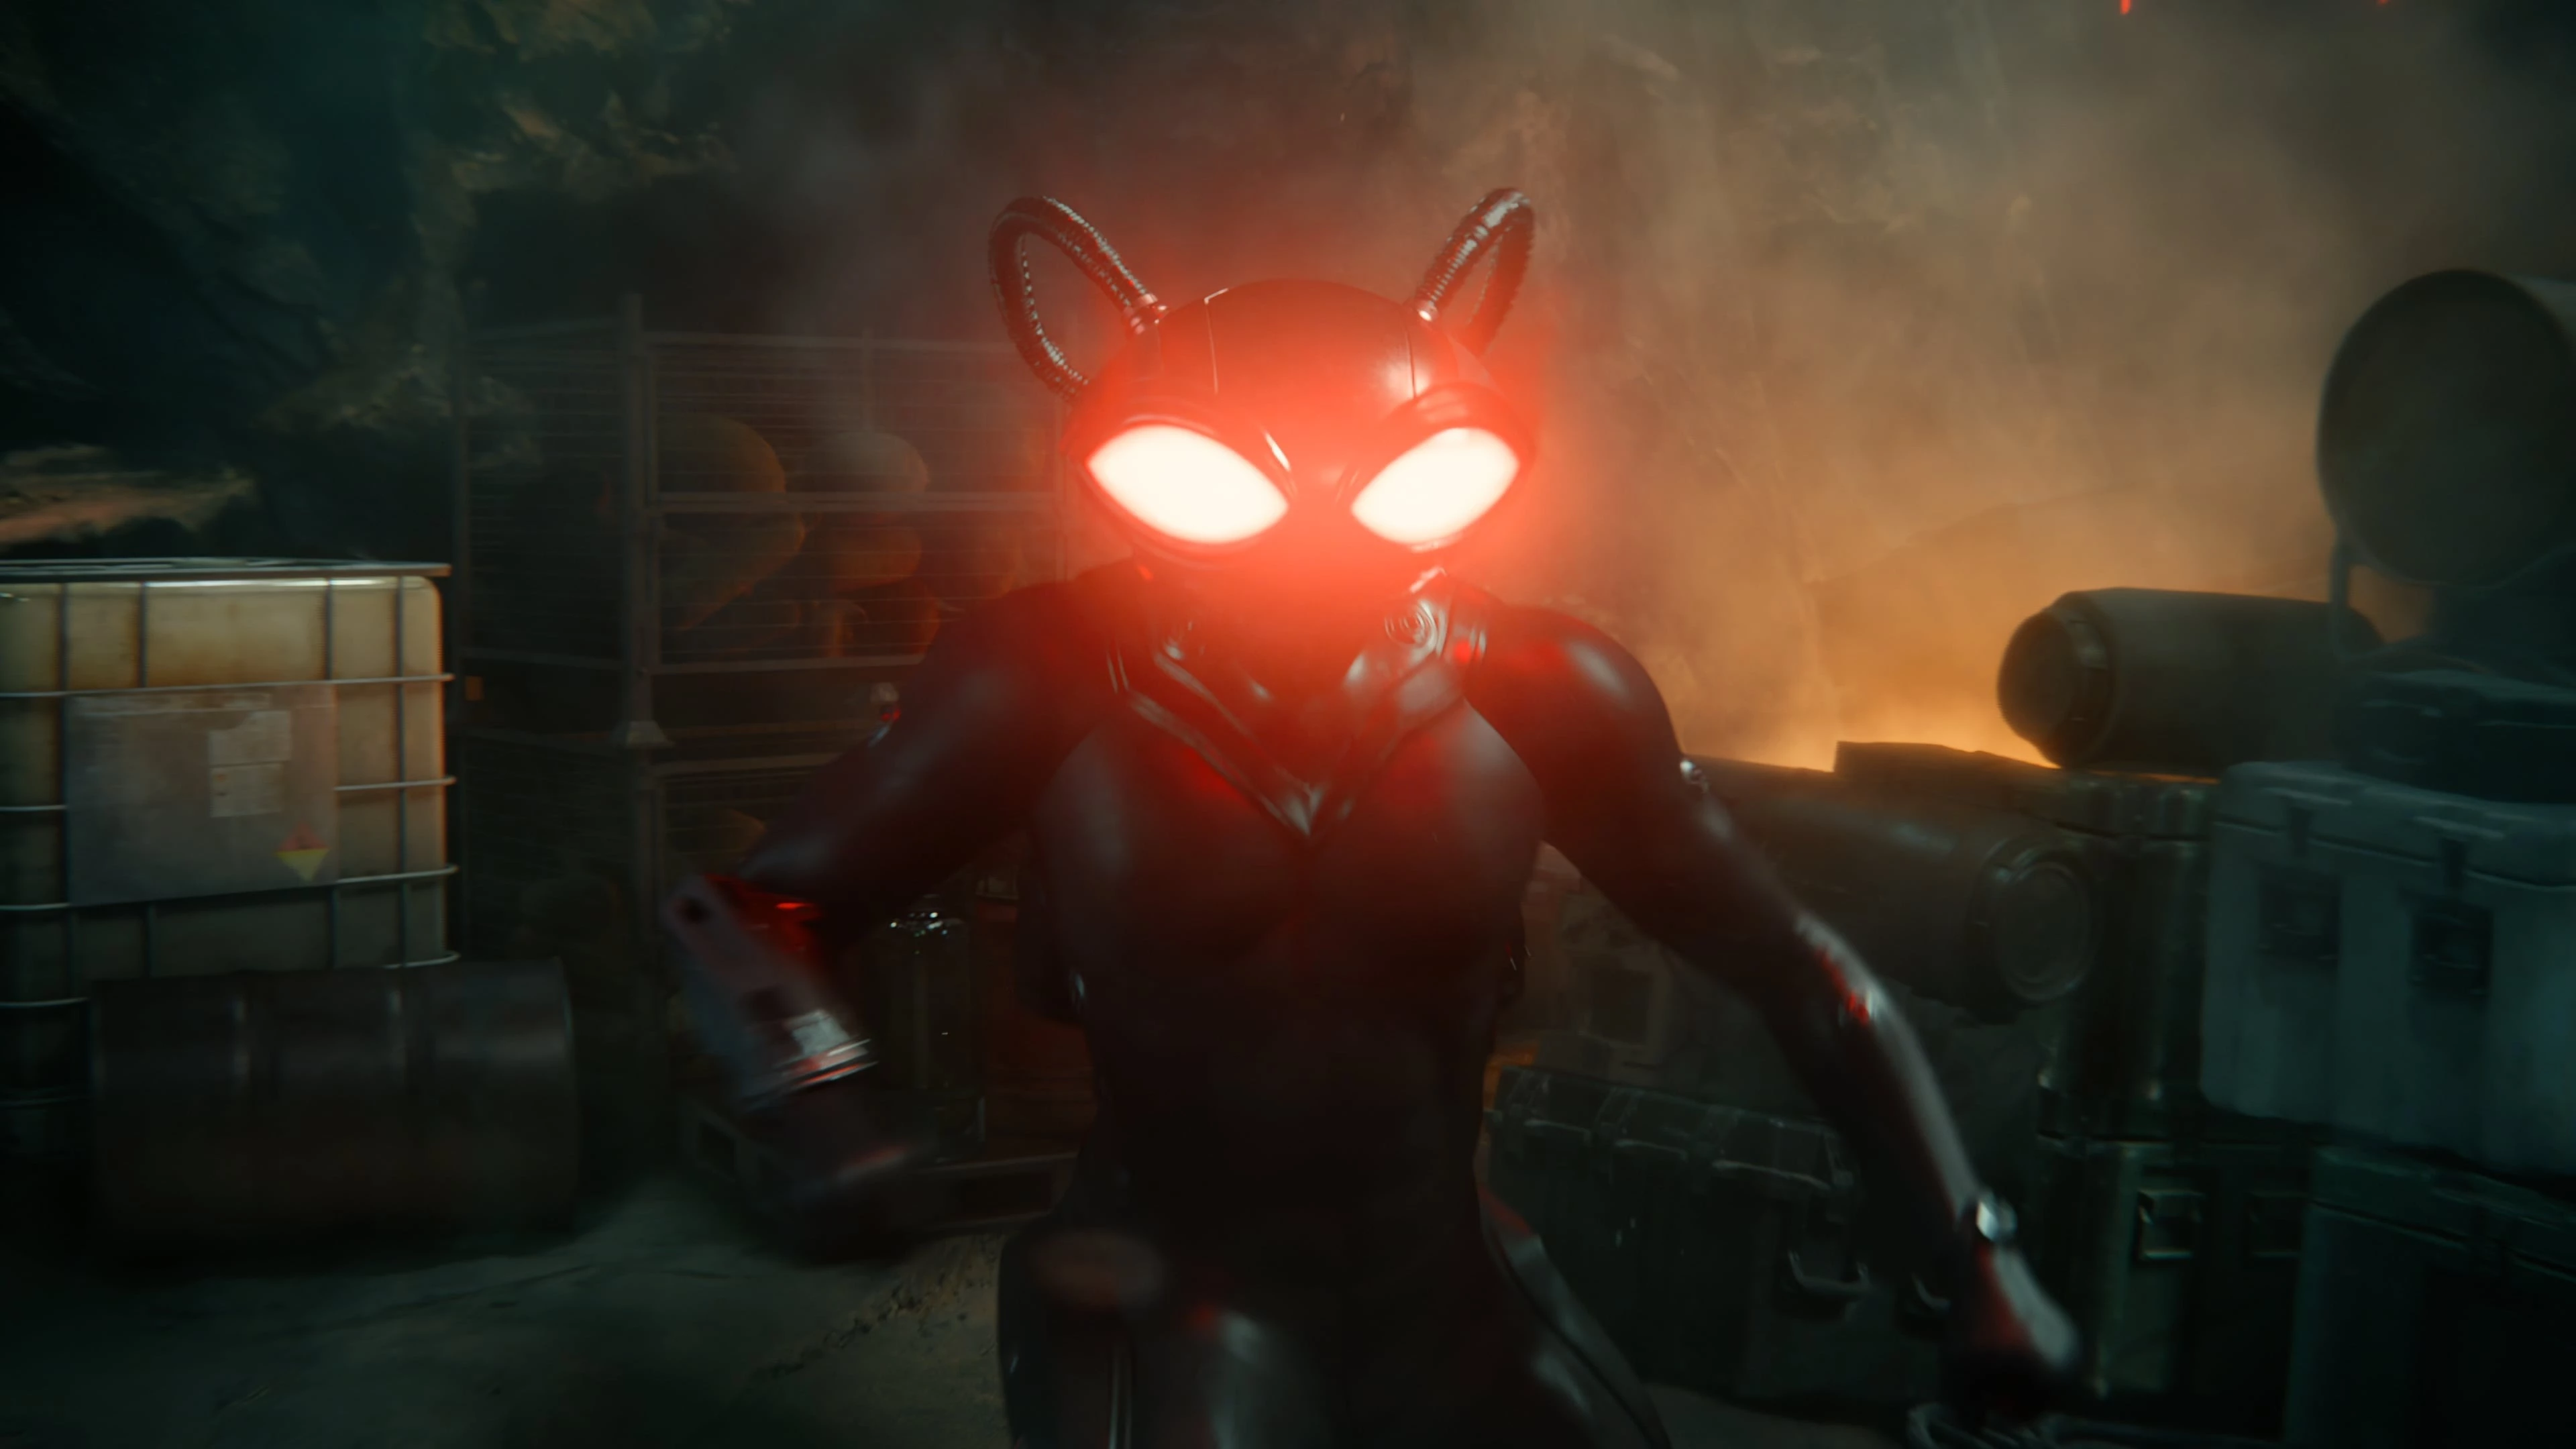 Black Manta Is An Expert In Engineering. Hist Black Suit Is Nearly Invulnerable, And He Can Shoot Plasma Beams From His Eyes